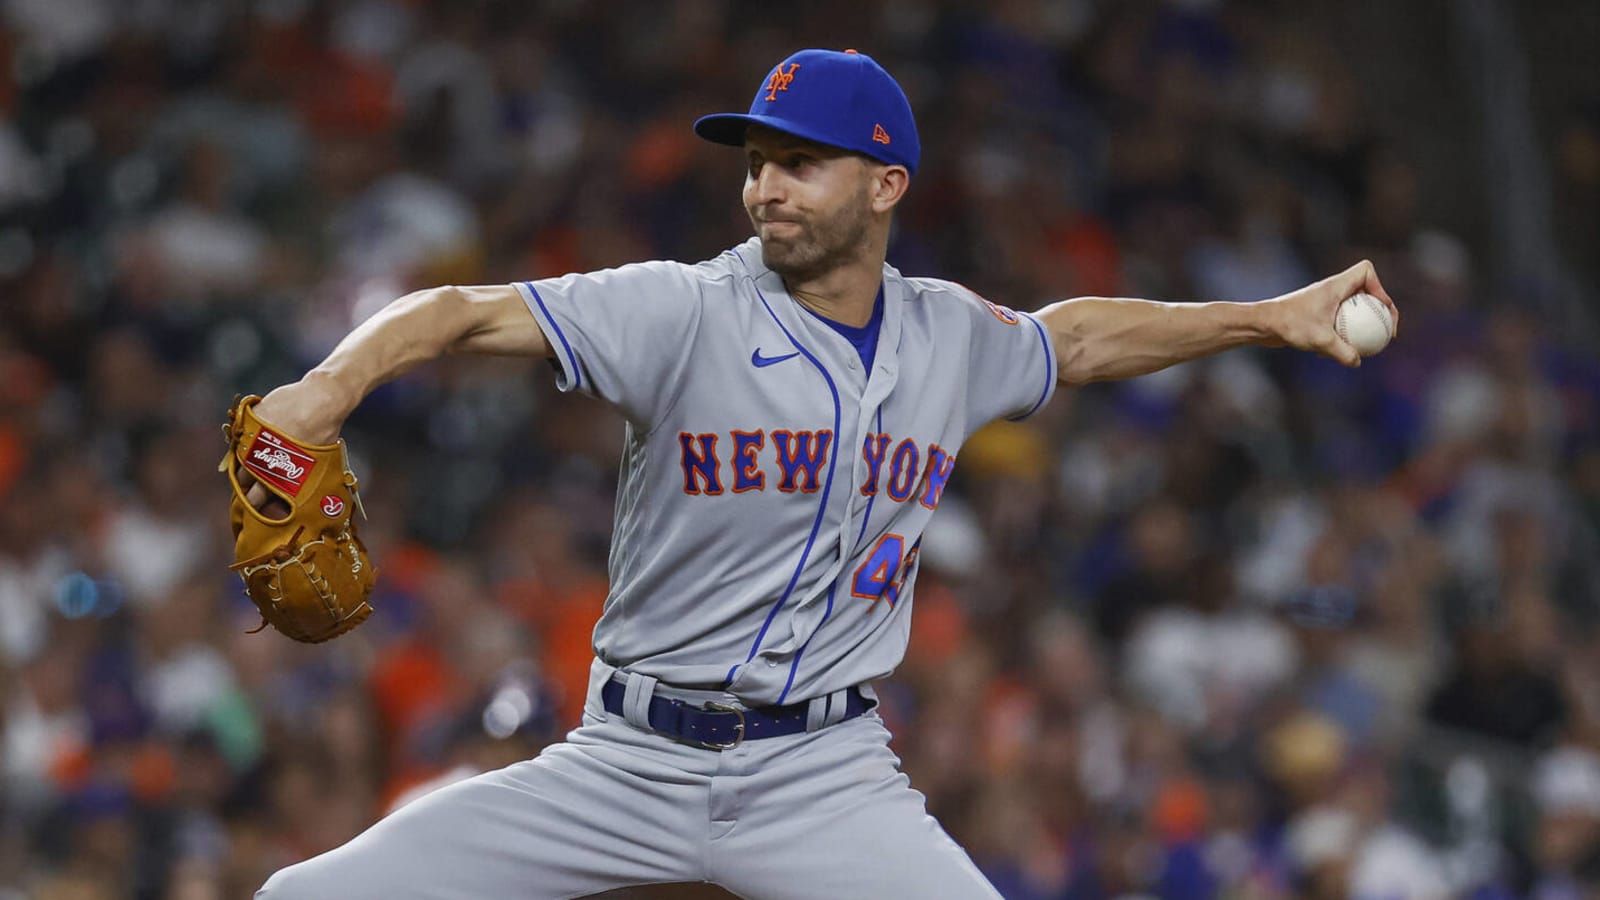 Yankees sign lefty reliever Chasen Shreve to minors contract